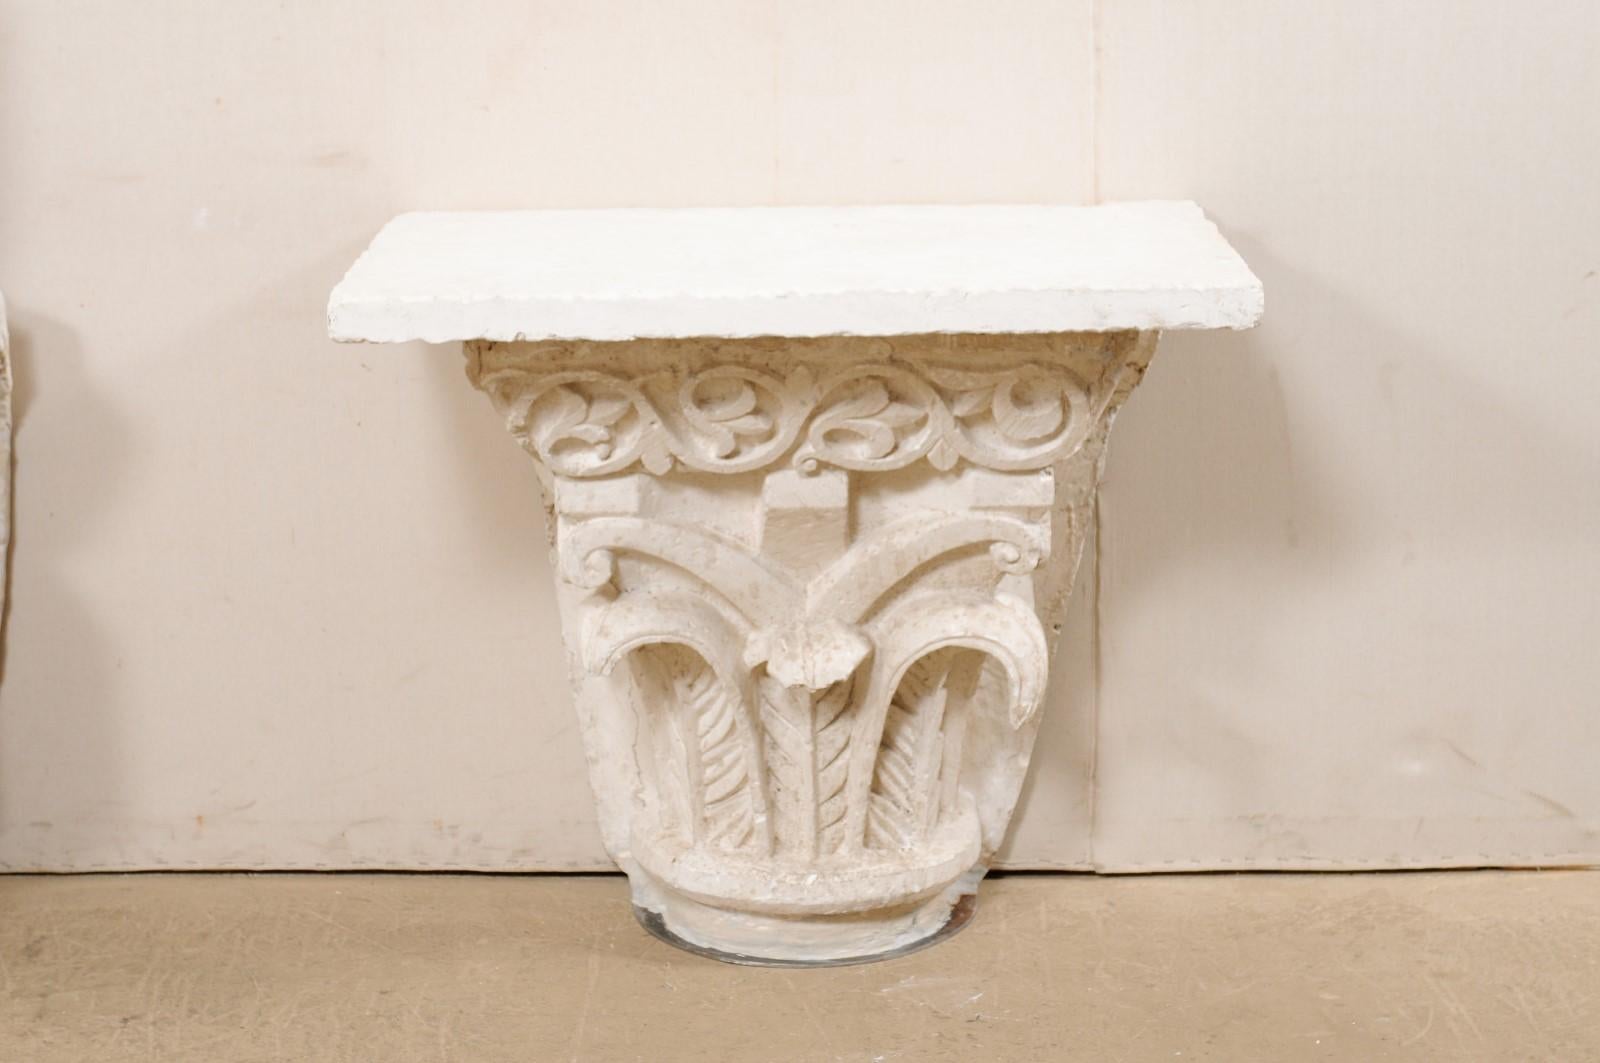 A Spanish console table from the early 20th century with newer fossilized coral top. This beautiful, custom console table has been fashioned from an antique base from Spain, consisting of a unique and architecturally inspired, scrolling leaf design